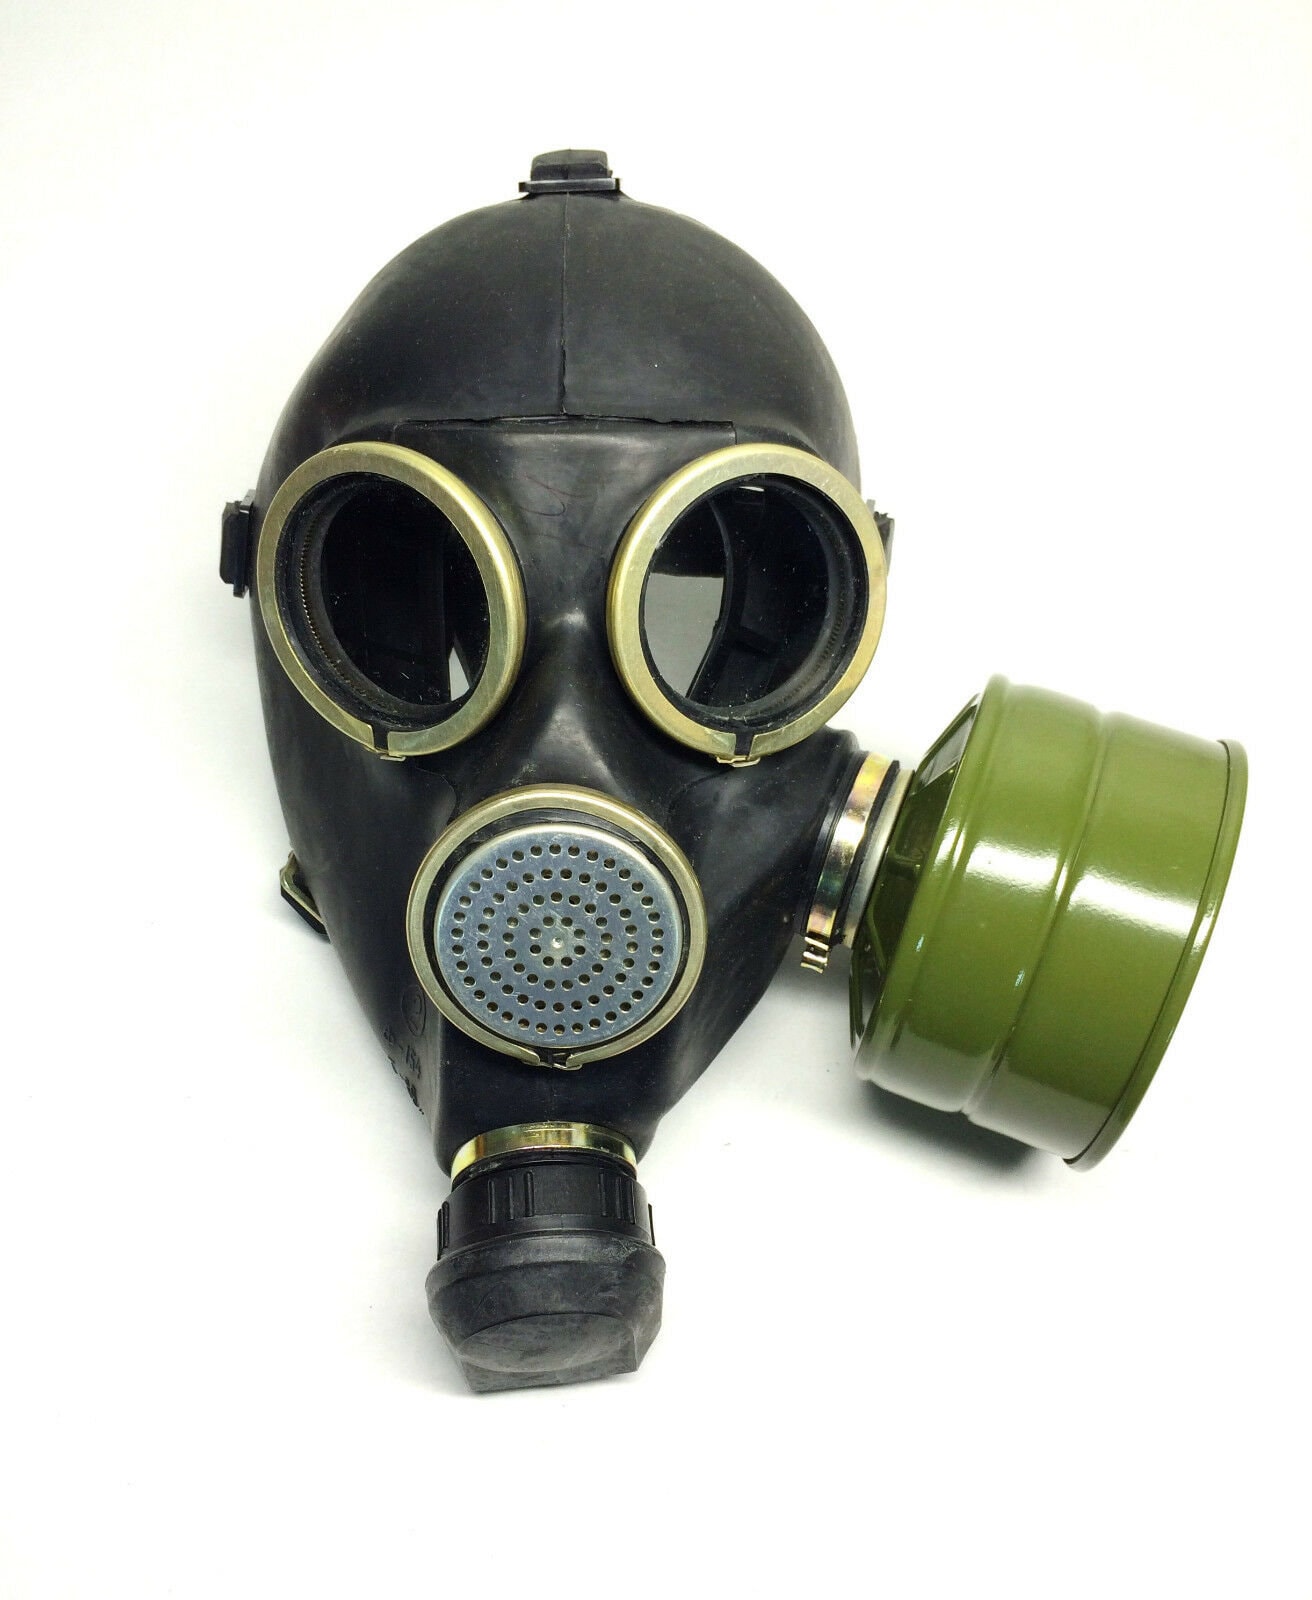 4 X Gas Mask GP5 Soviet Army Gas Mask Gasmask Military Cyber Mask White GP  5 Very Rare Model you Will Receive 4 Gas Masks -  Denmark